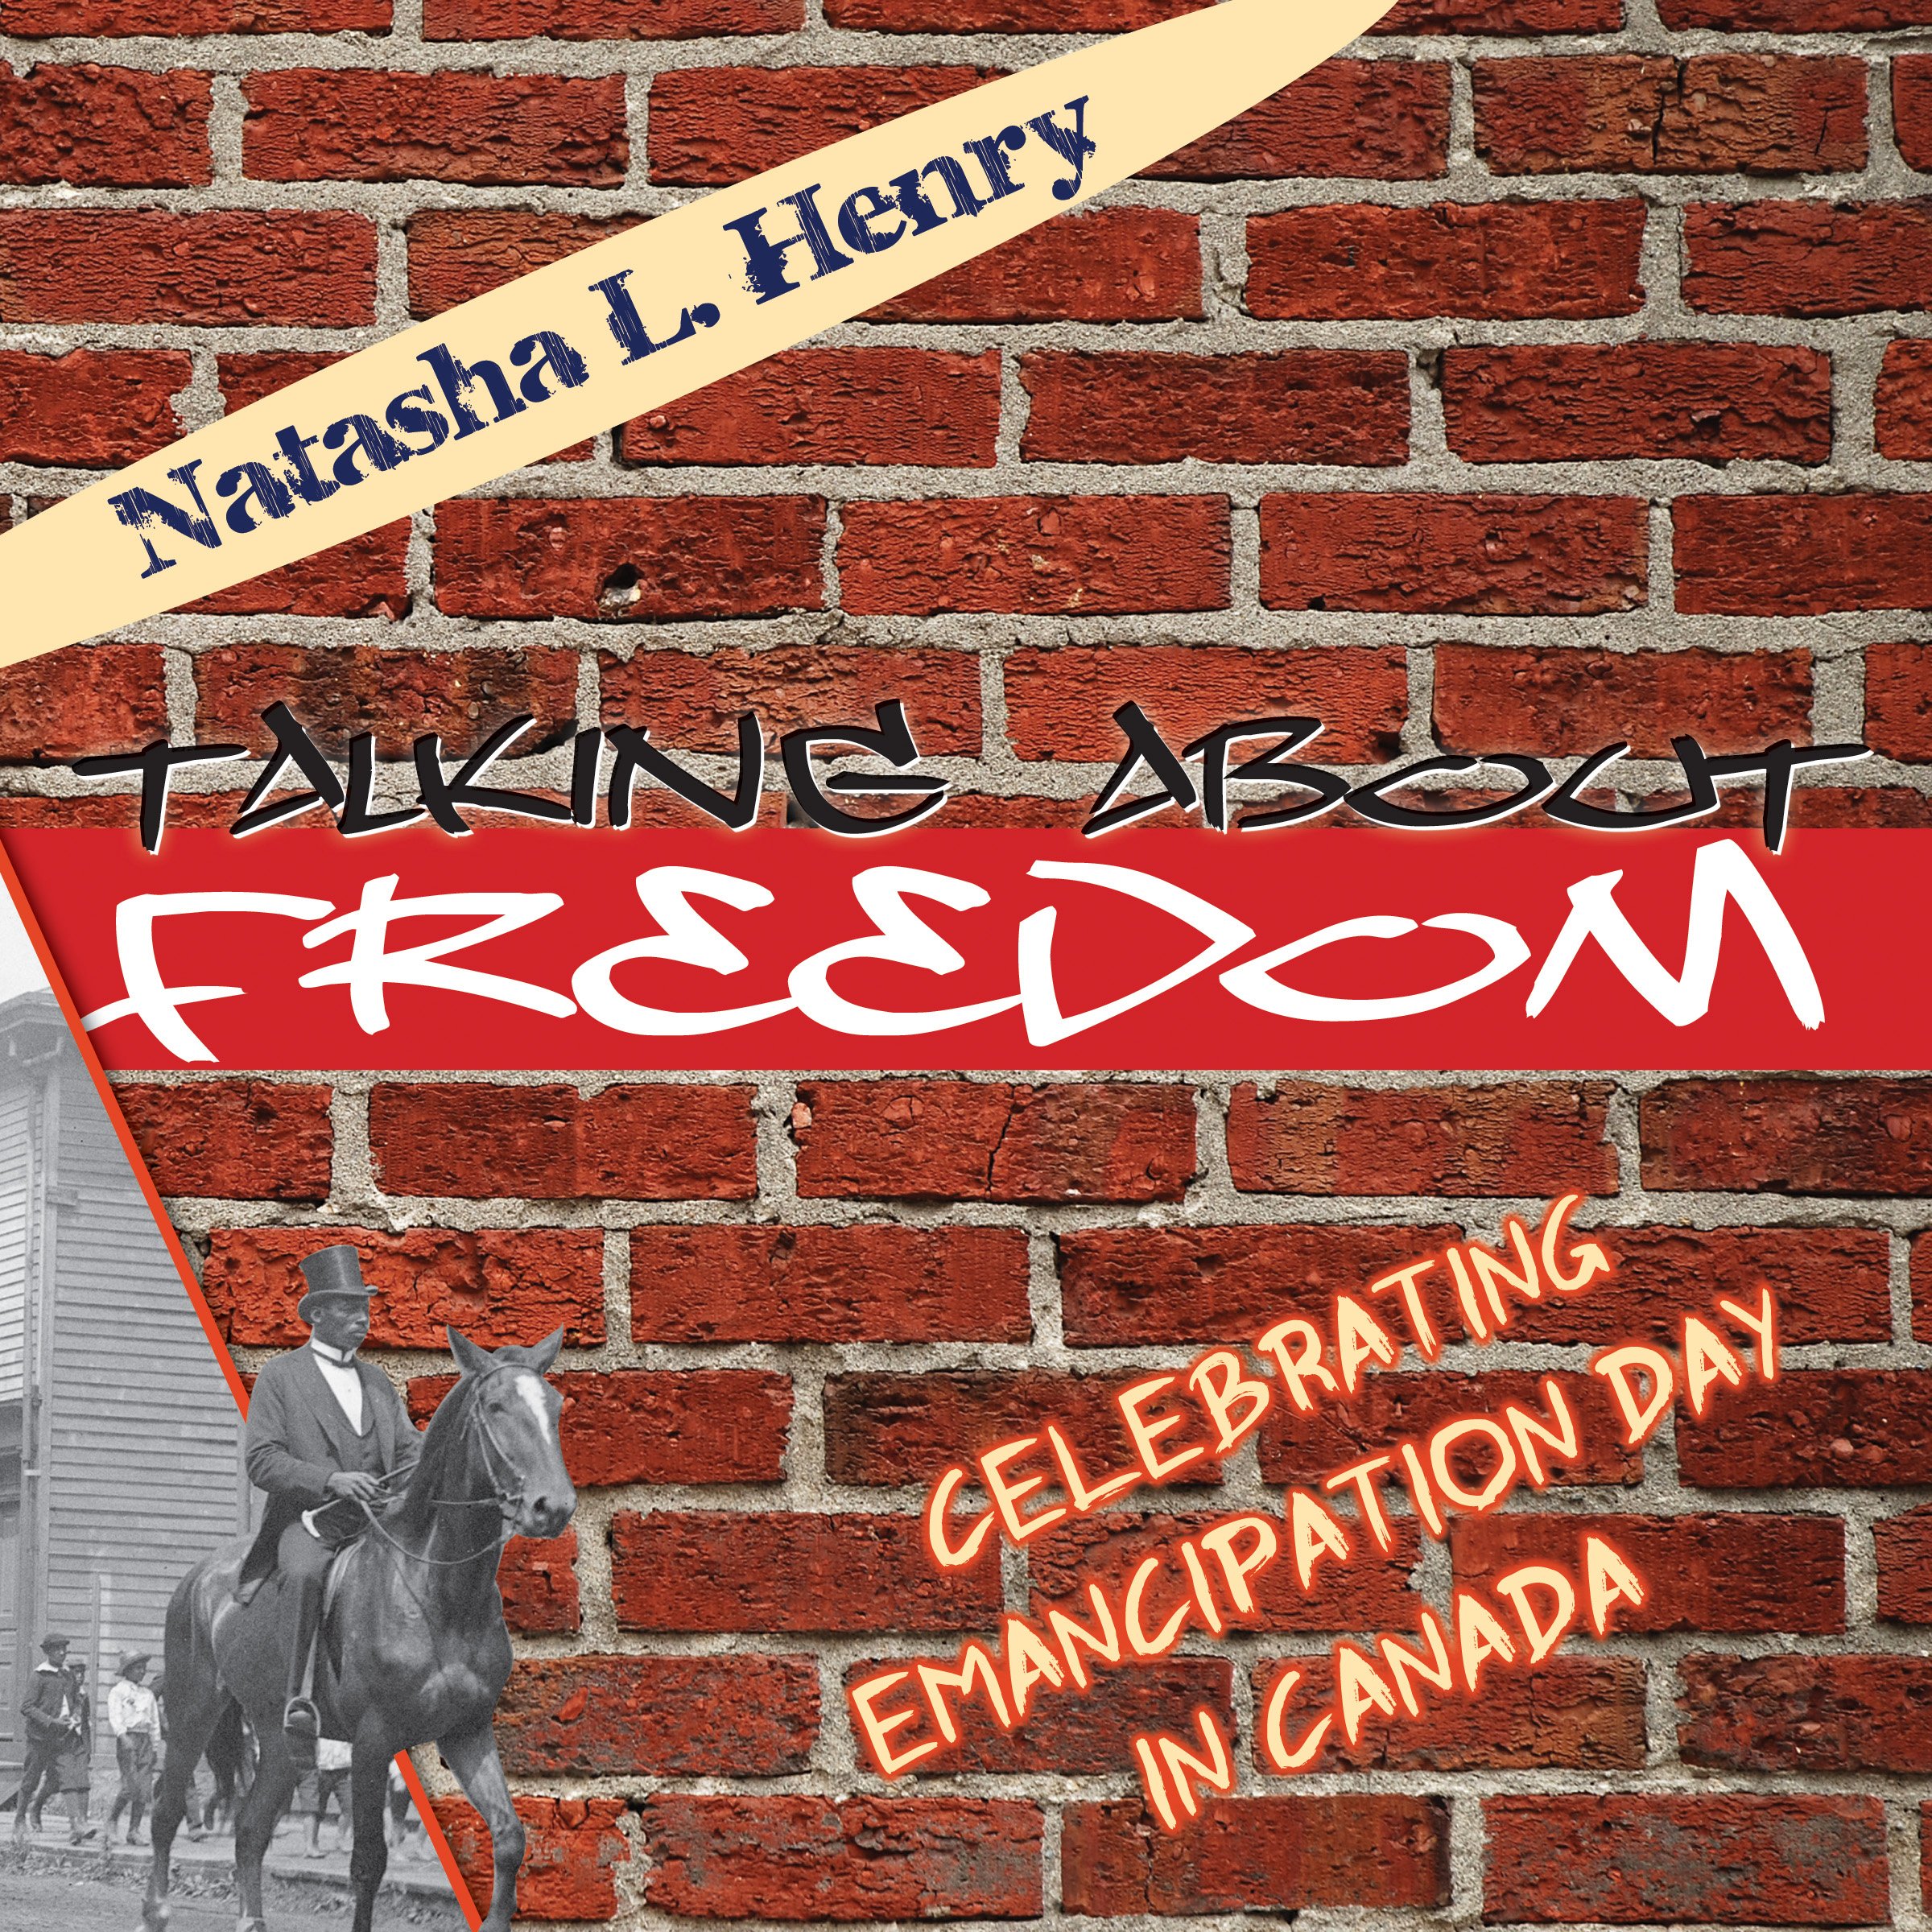 Talking about freedom: celebrating Emancipation Day in Canada by Natasha L. Henry